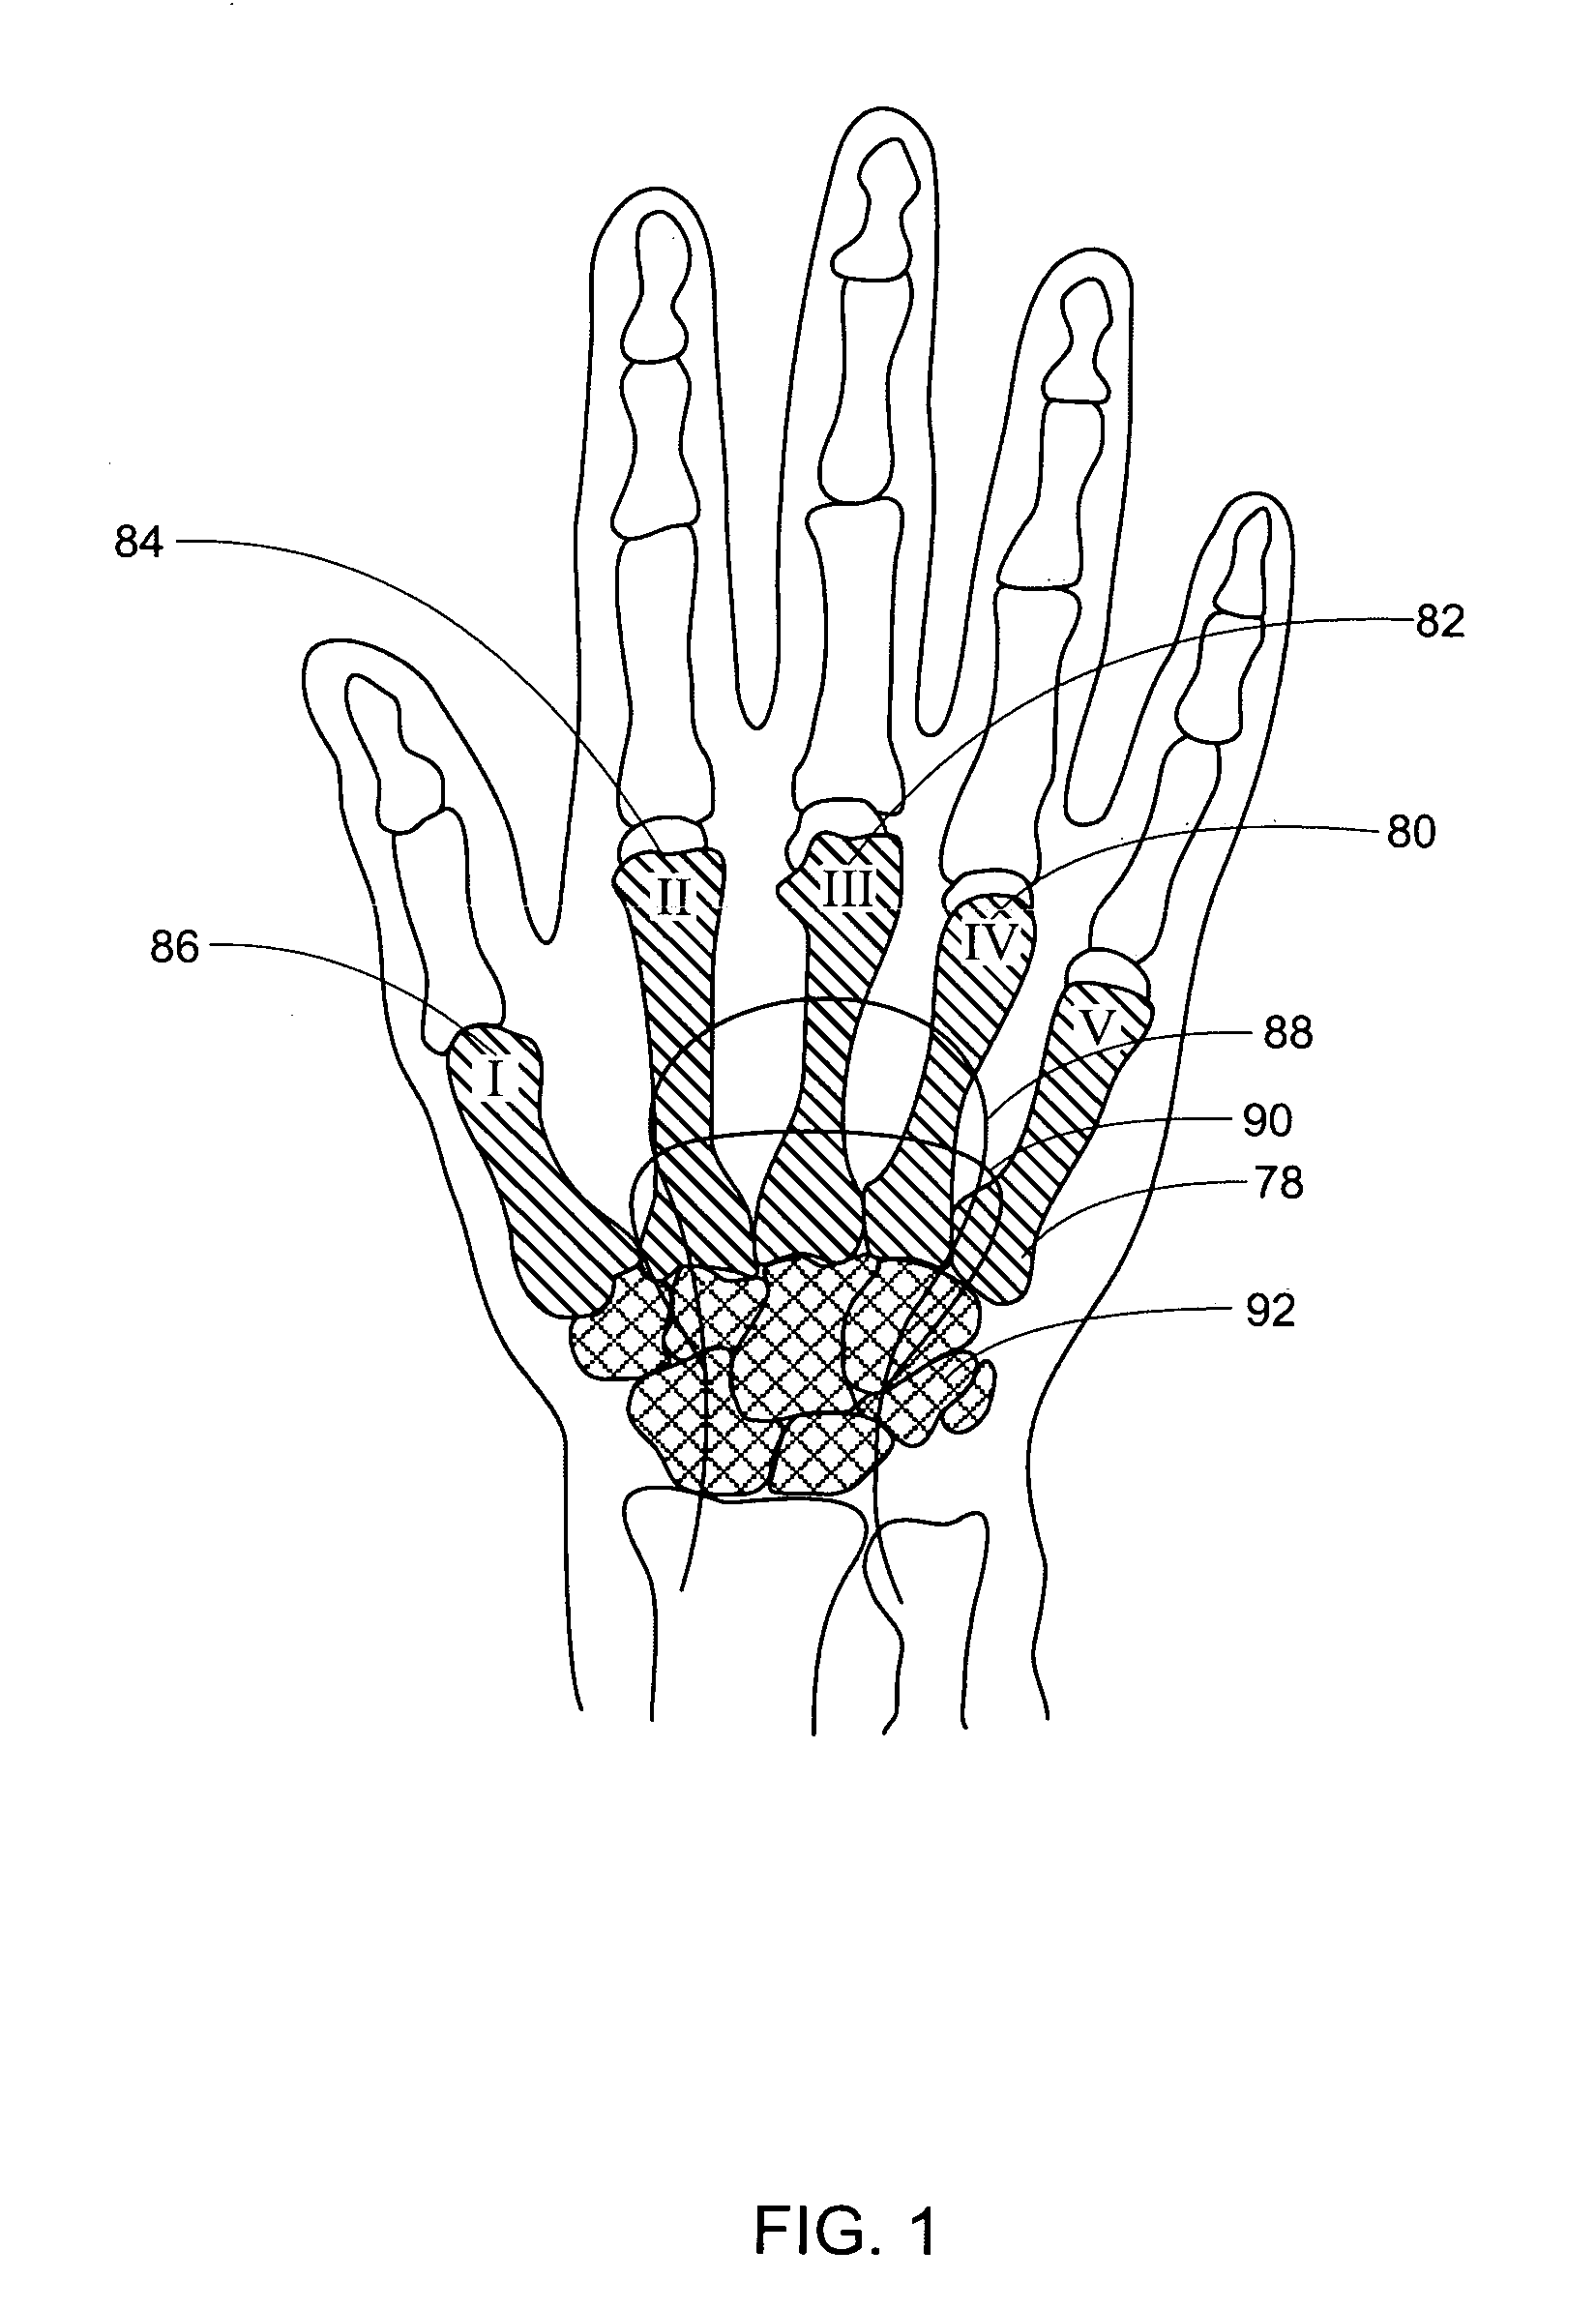 Grip assist apparatus with palm arch support